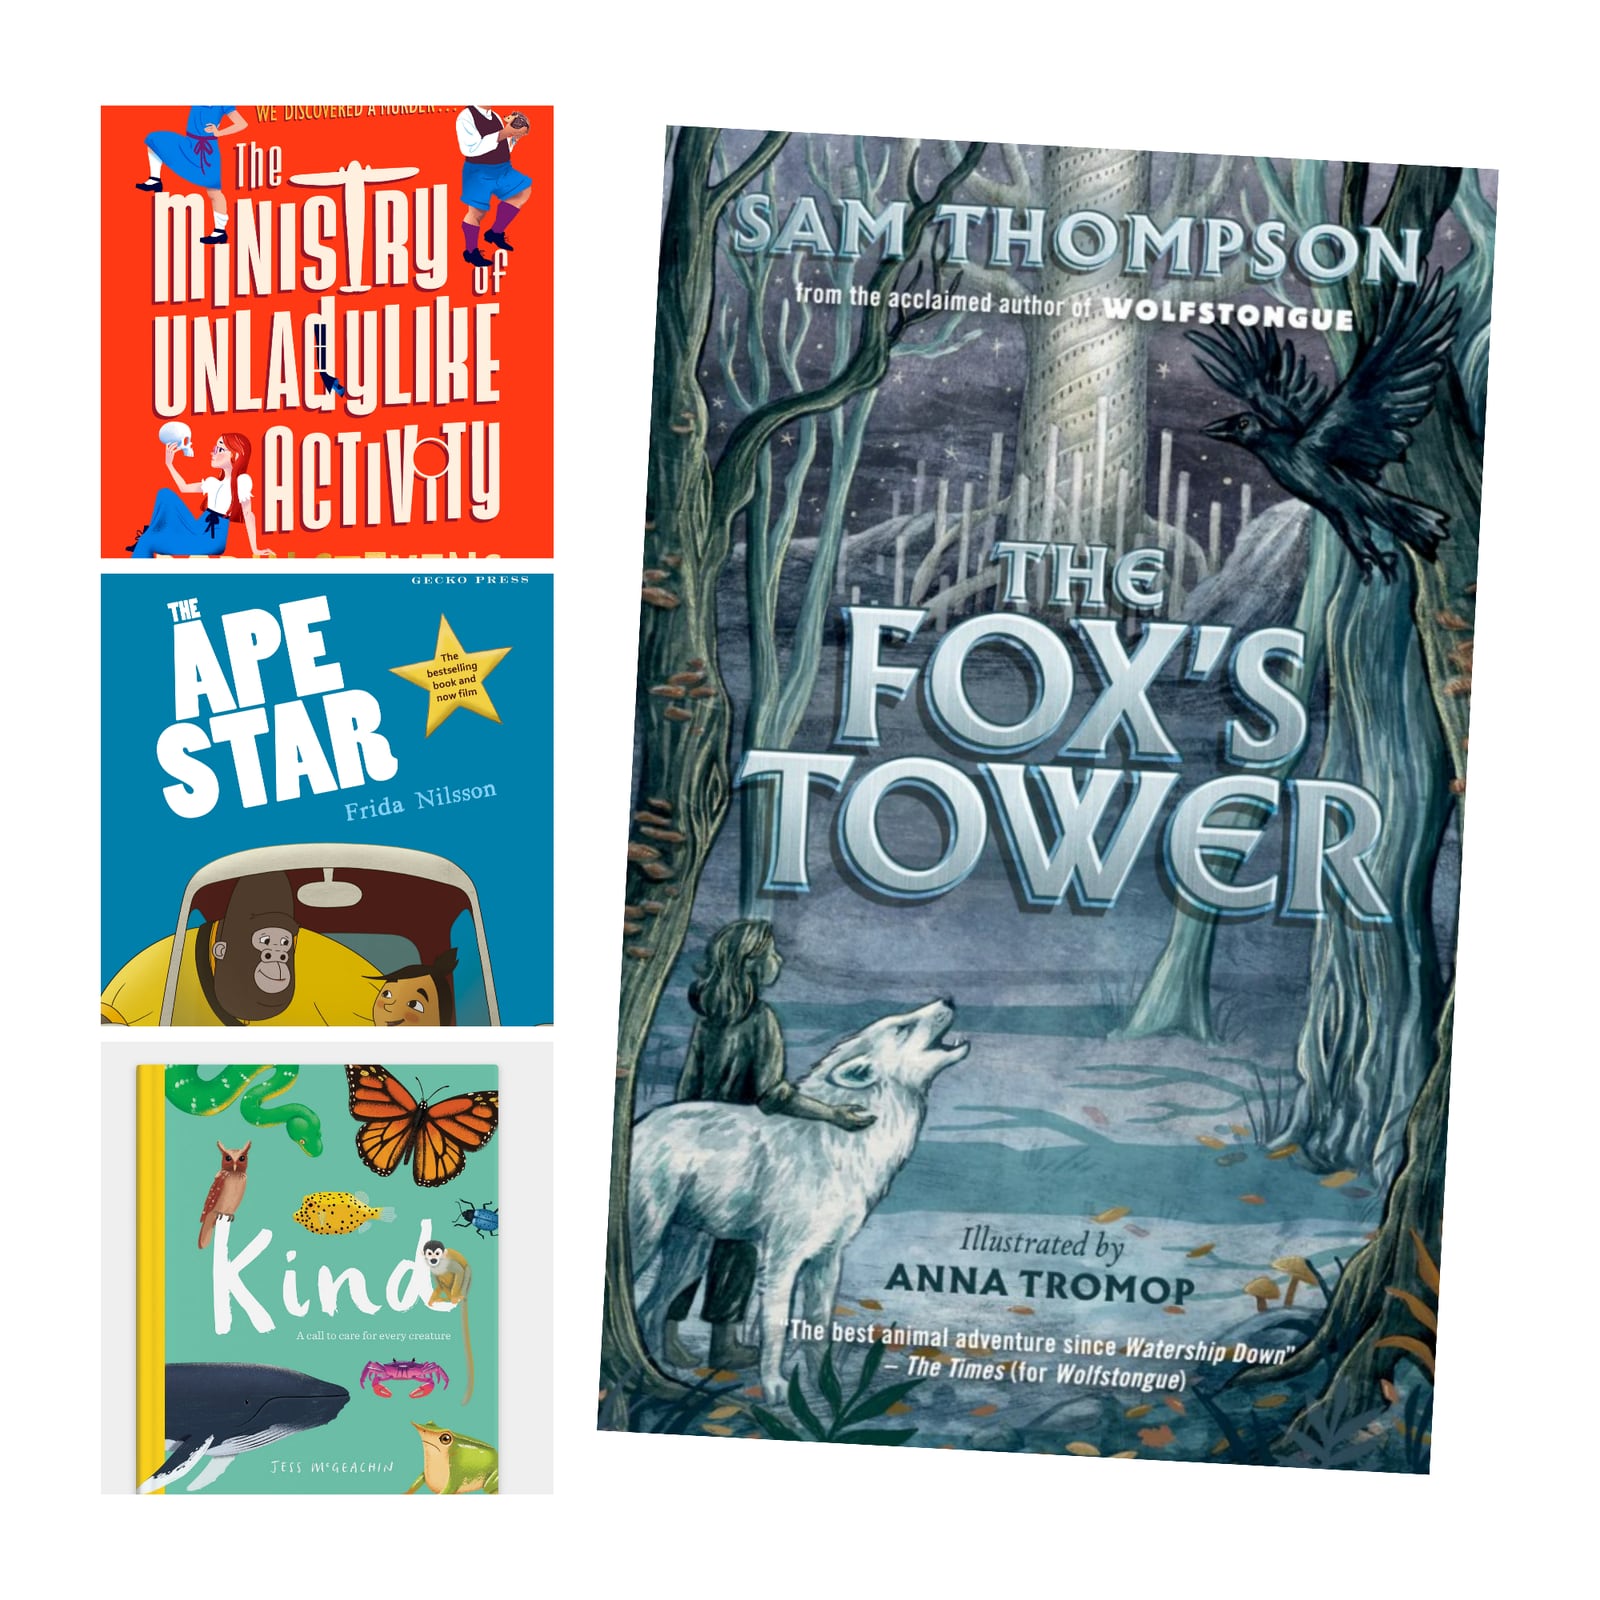 Good reads for children: The Ministry of Unladylike Activity, Ape Star, Kind and The Fox’s Tower